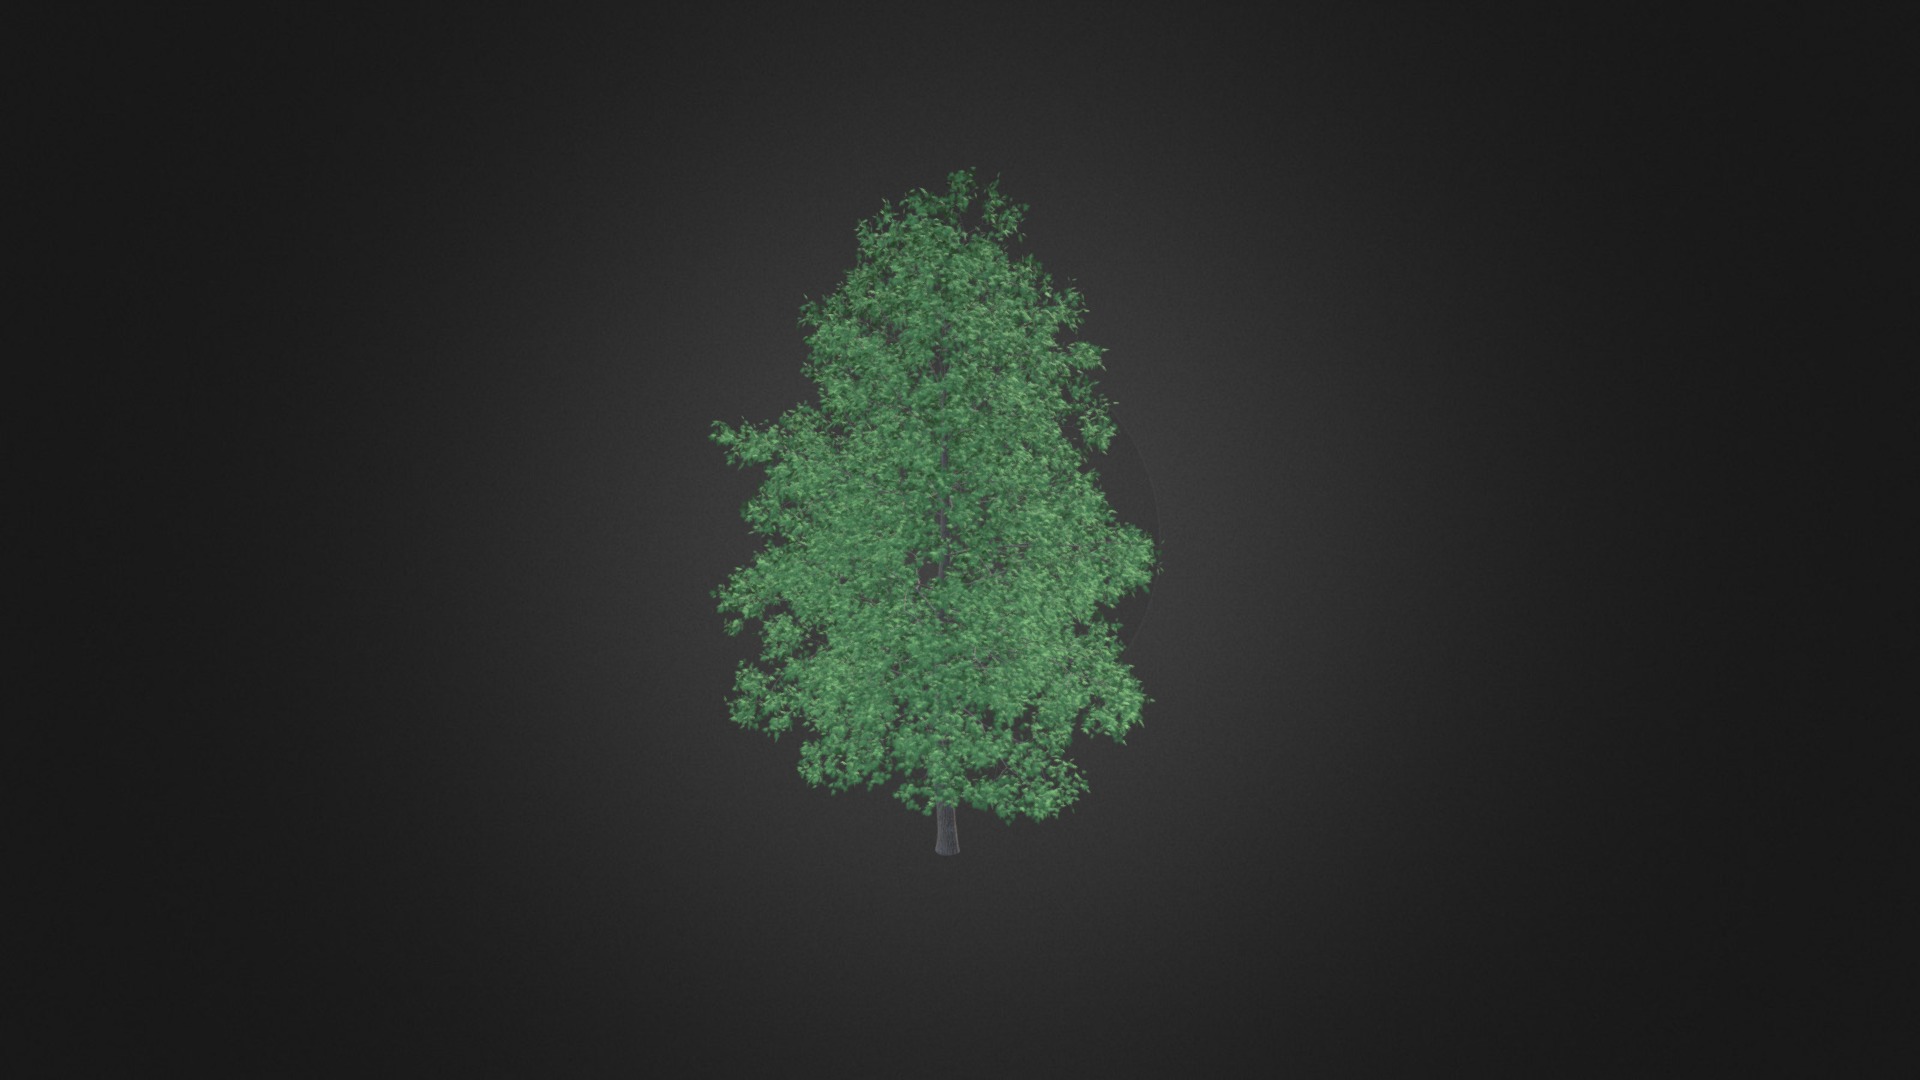 3D model American Sweetgum 3D Model 5.4m - This is a 3D model of the American Sweetgum 3D Model 5.4m. The 3D model is about background pattern.